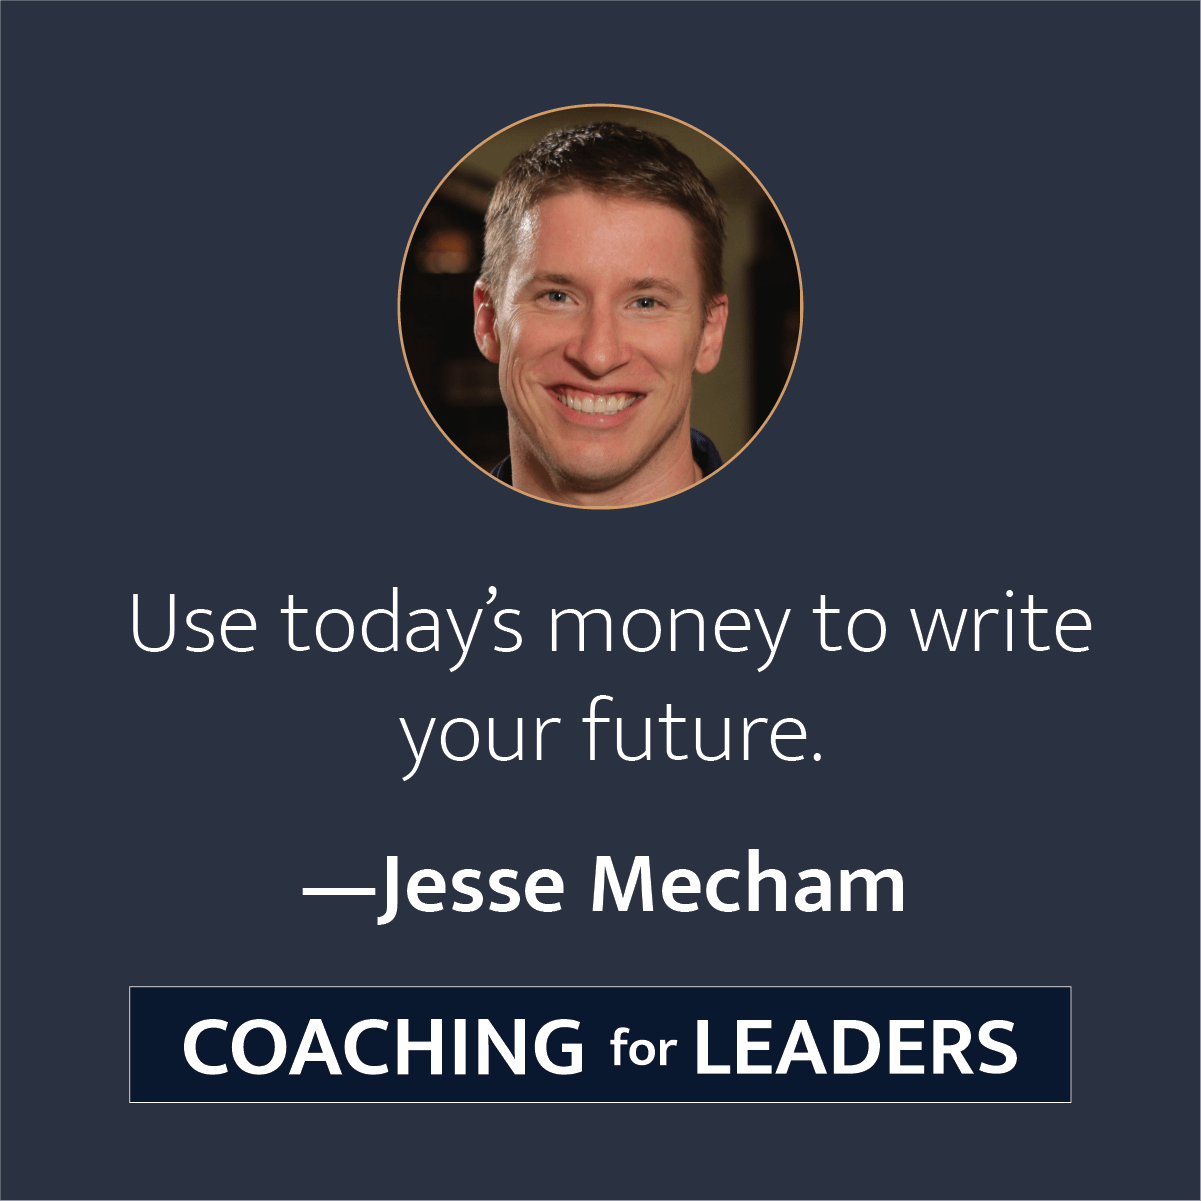 Use today's money to write your future.